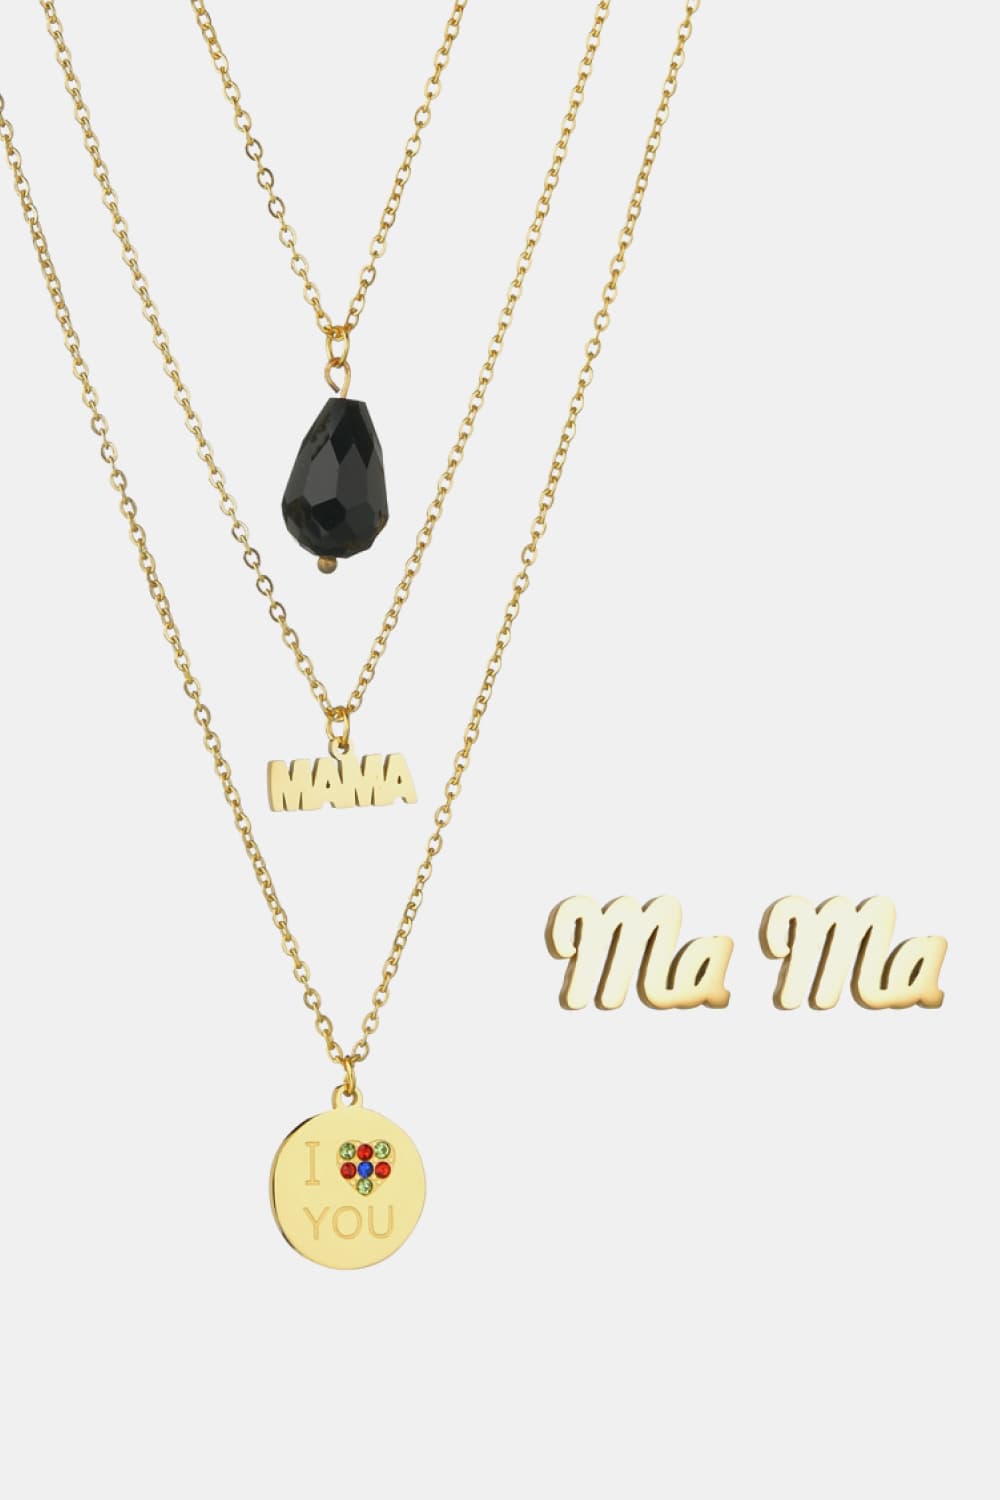 Triple-layer MAMA I LOVE YOU 18K gold-plated Pemdant Combo Deal